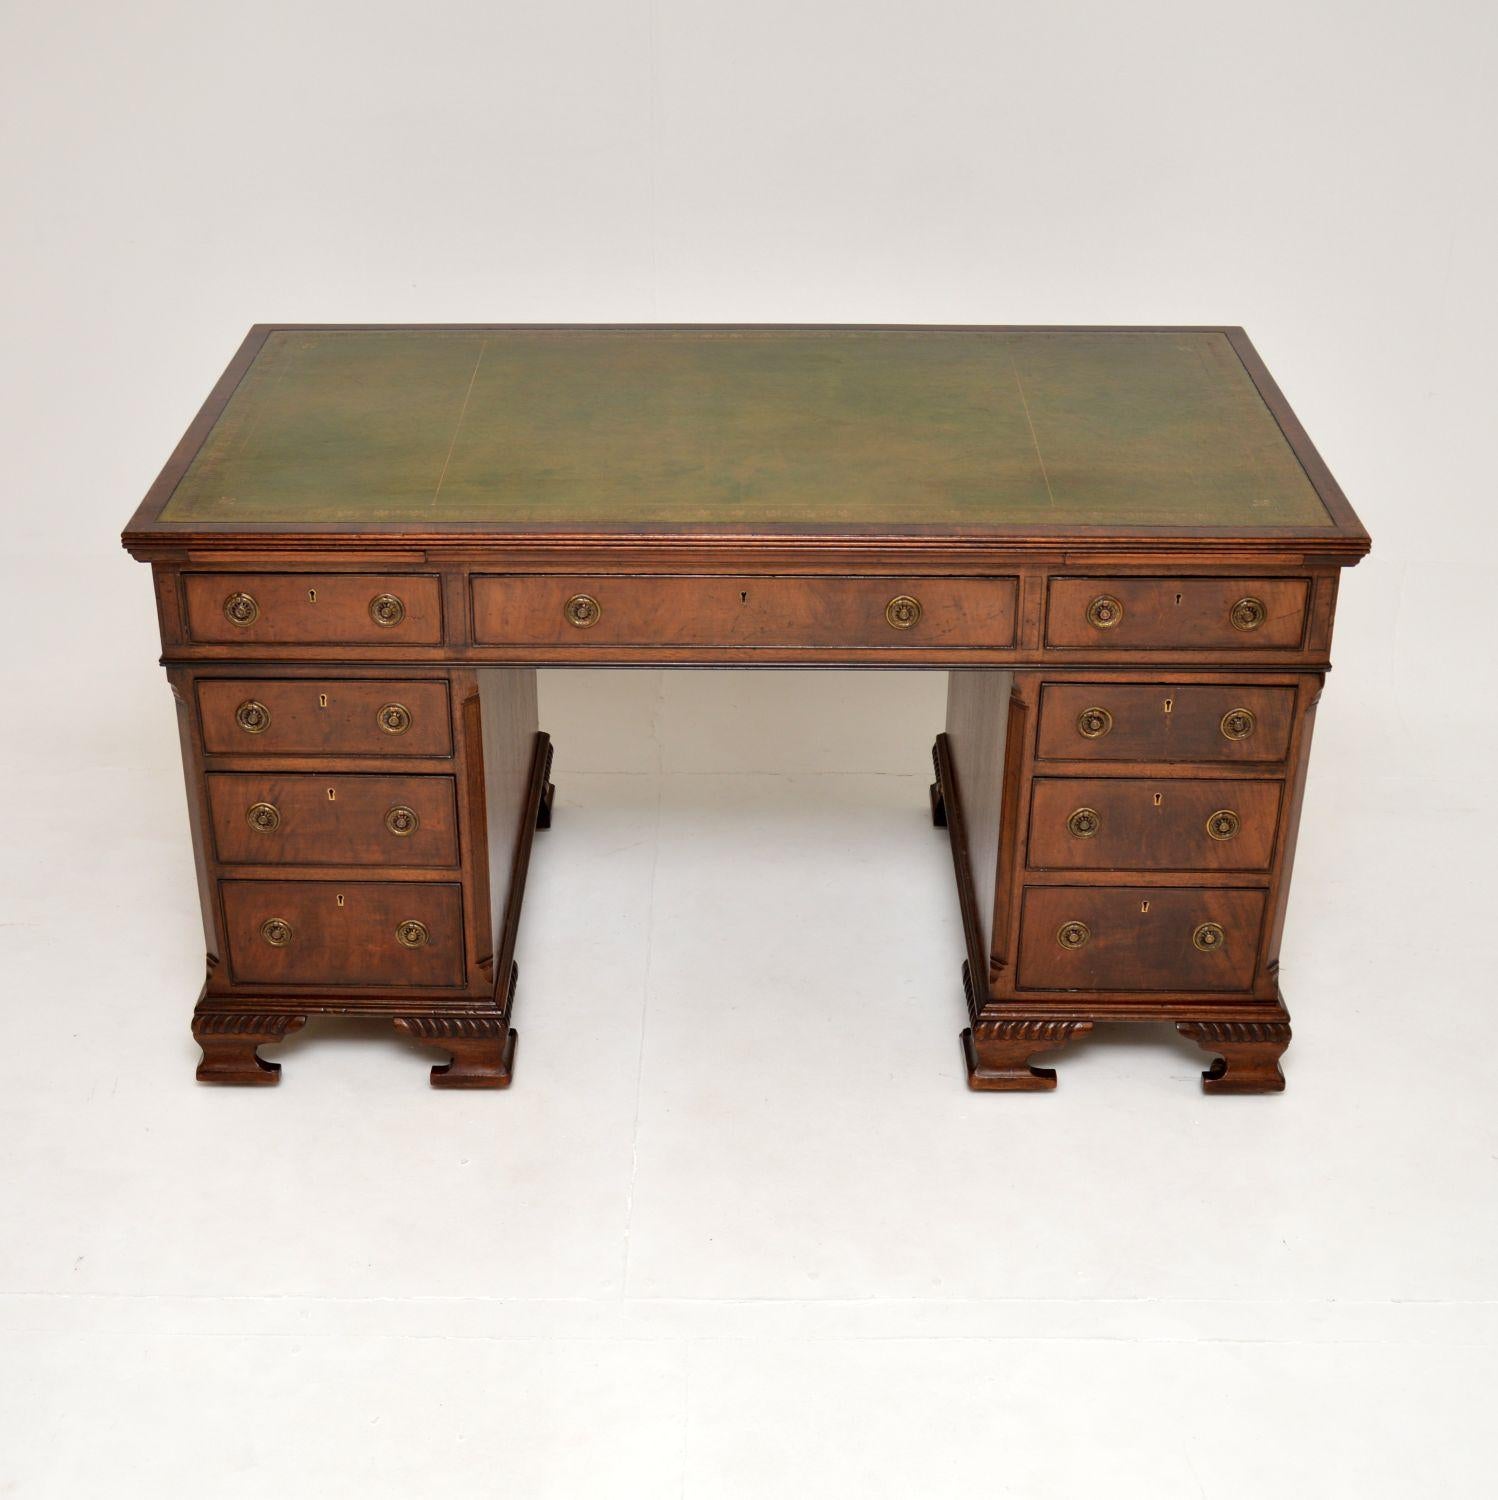 A fantastic antique Victorian leather top pedestal desk. This was made in England, it dates from around the 1860-1880 period.

It is of superb quality and is a great size, with lots of lovely features. The pedestal bases sit on interesting ogee